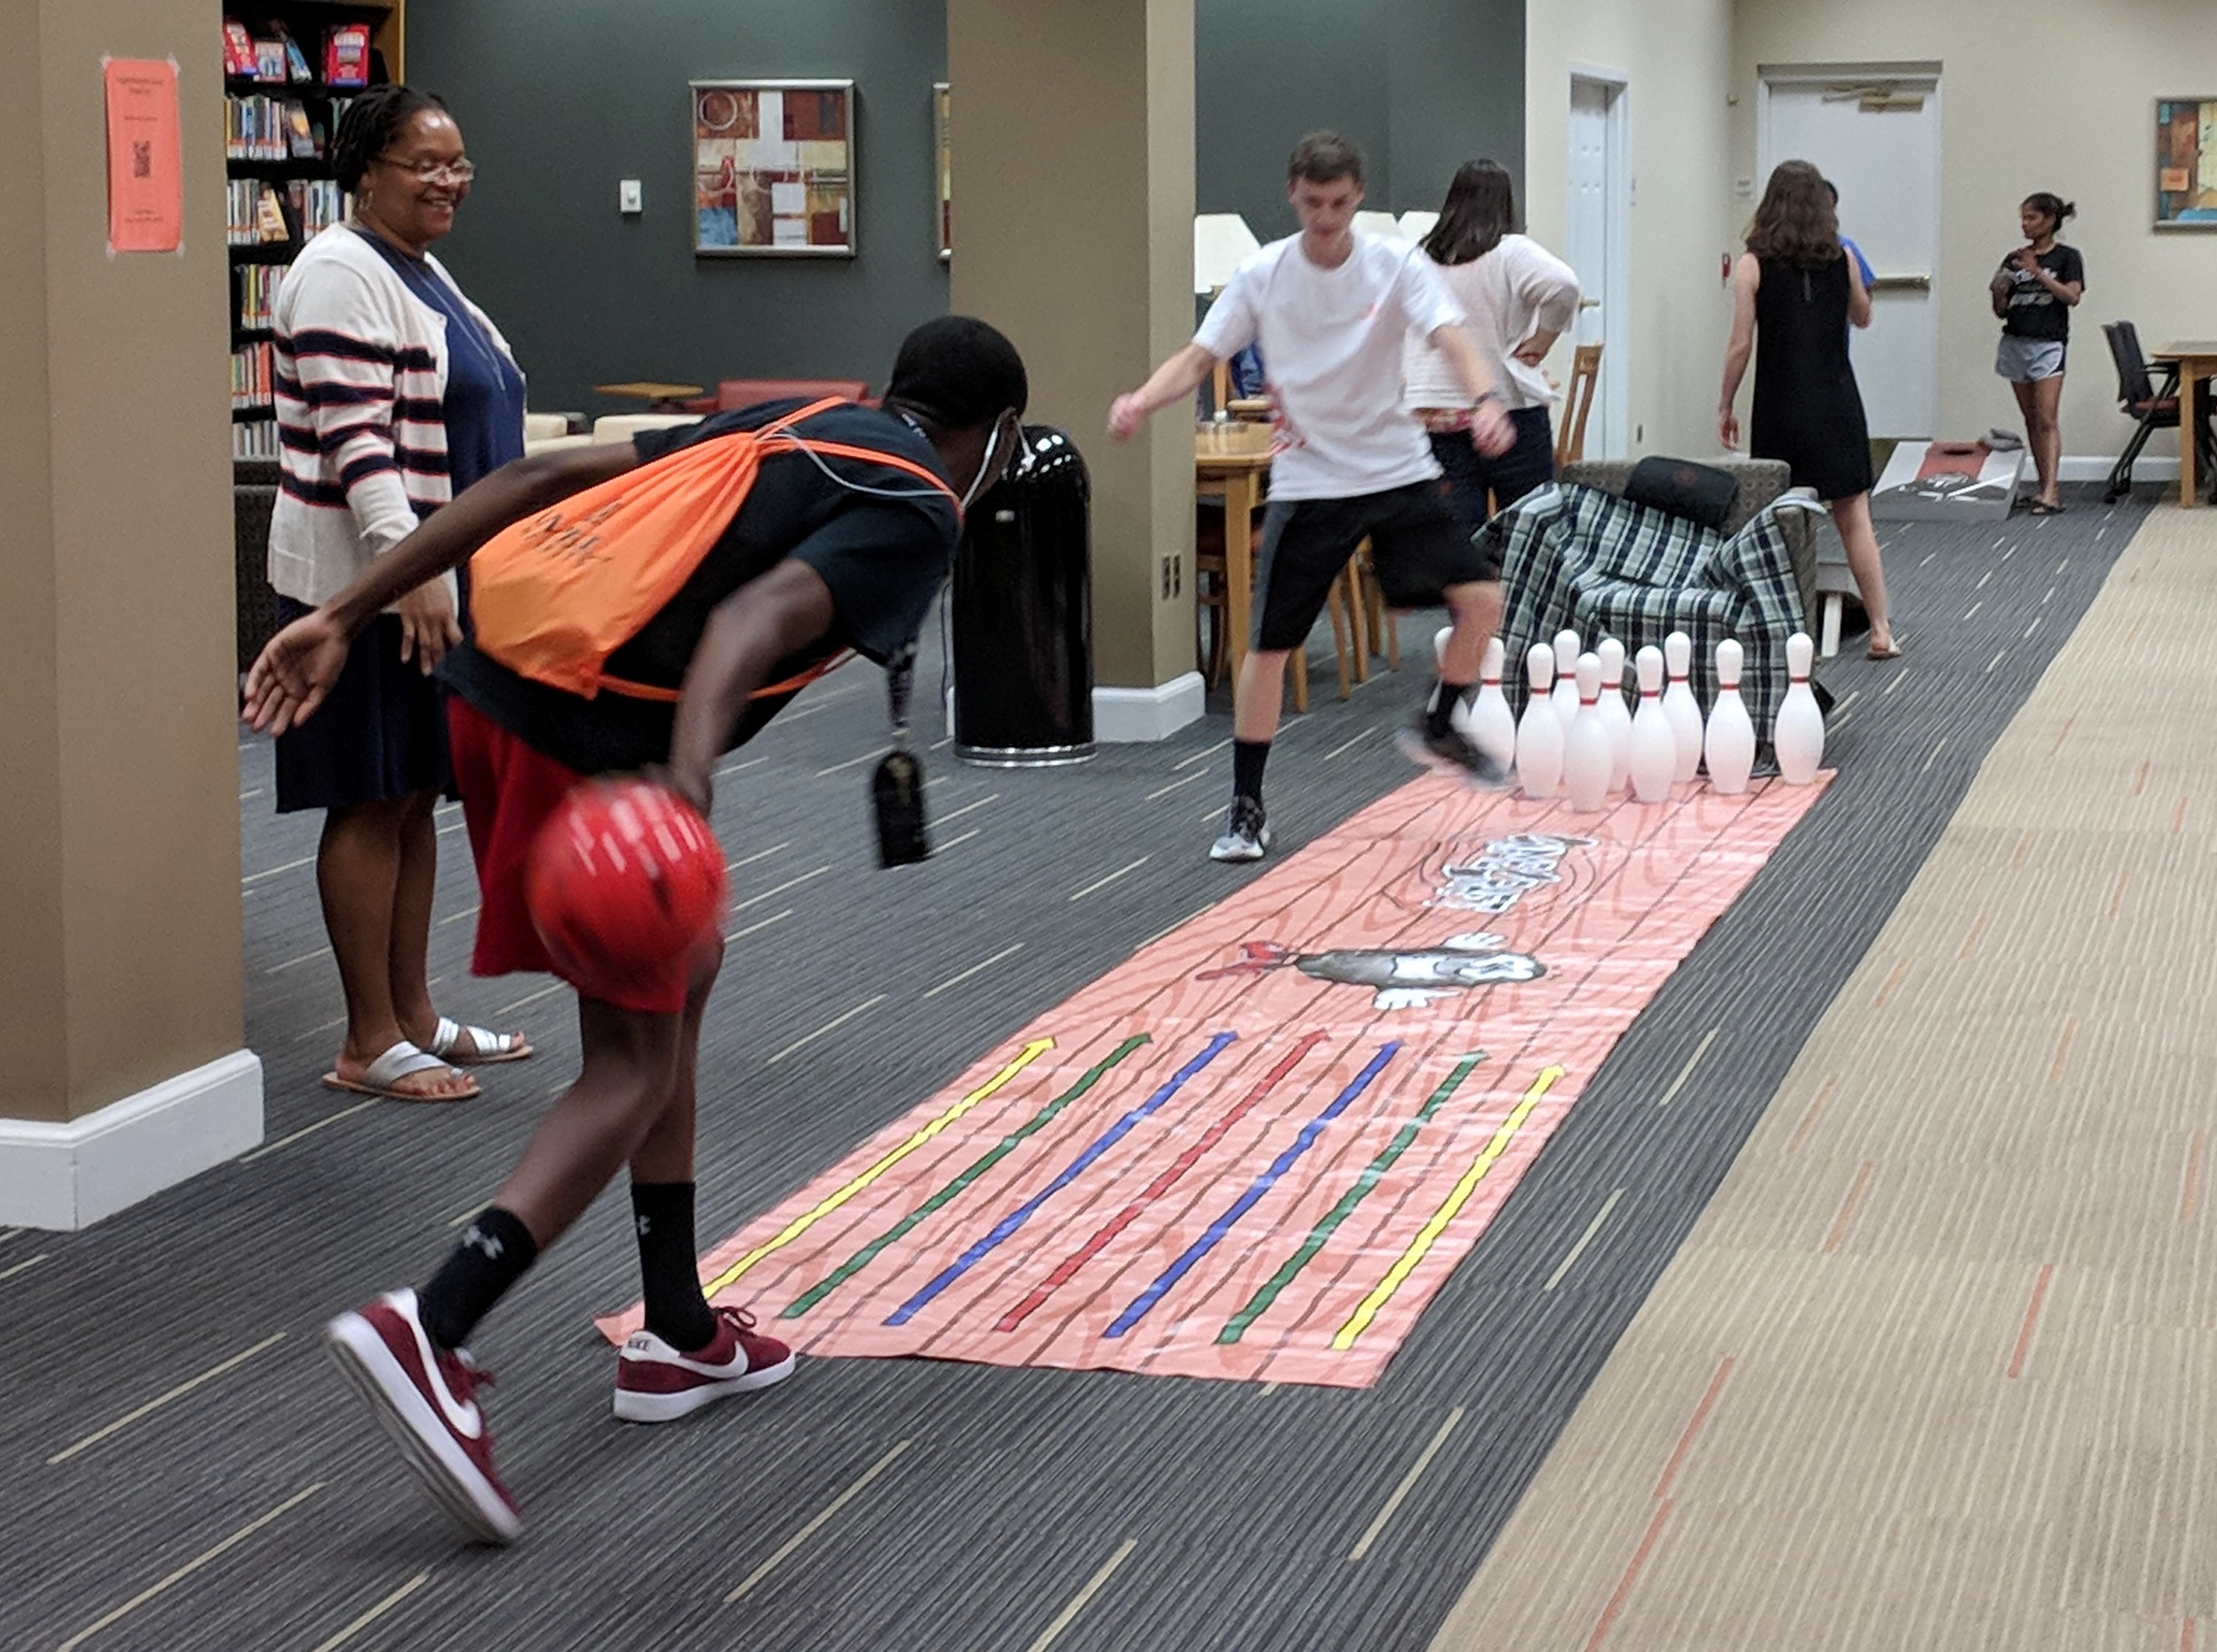 Students playing the different yard games; group of students in the front are bowling and the group of students in the back are playing corn hole